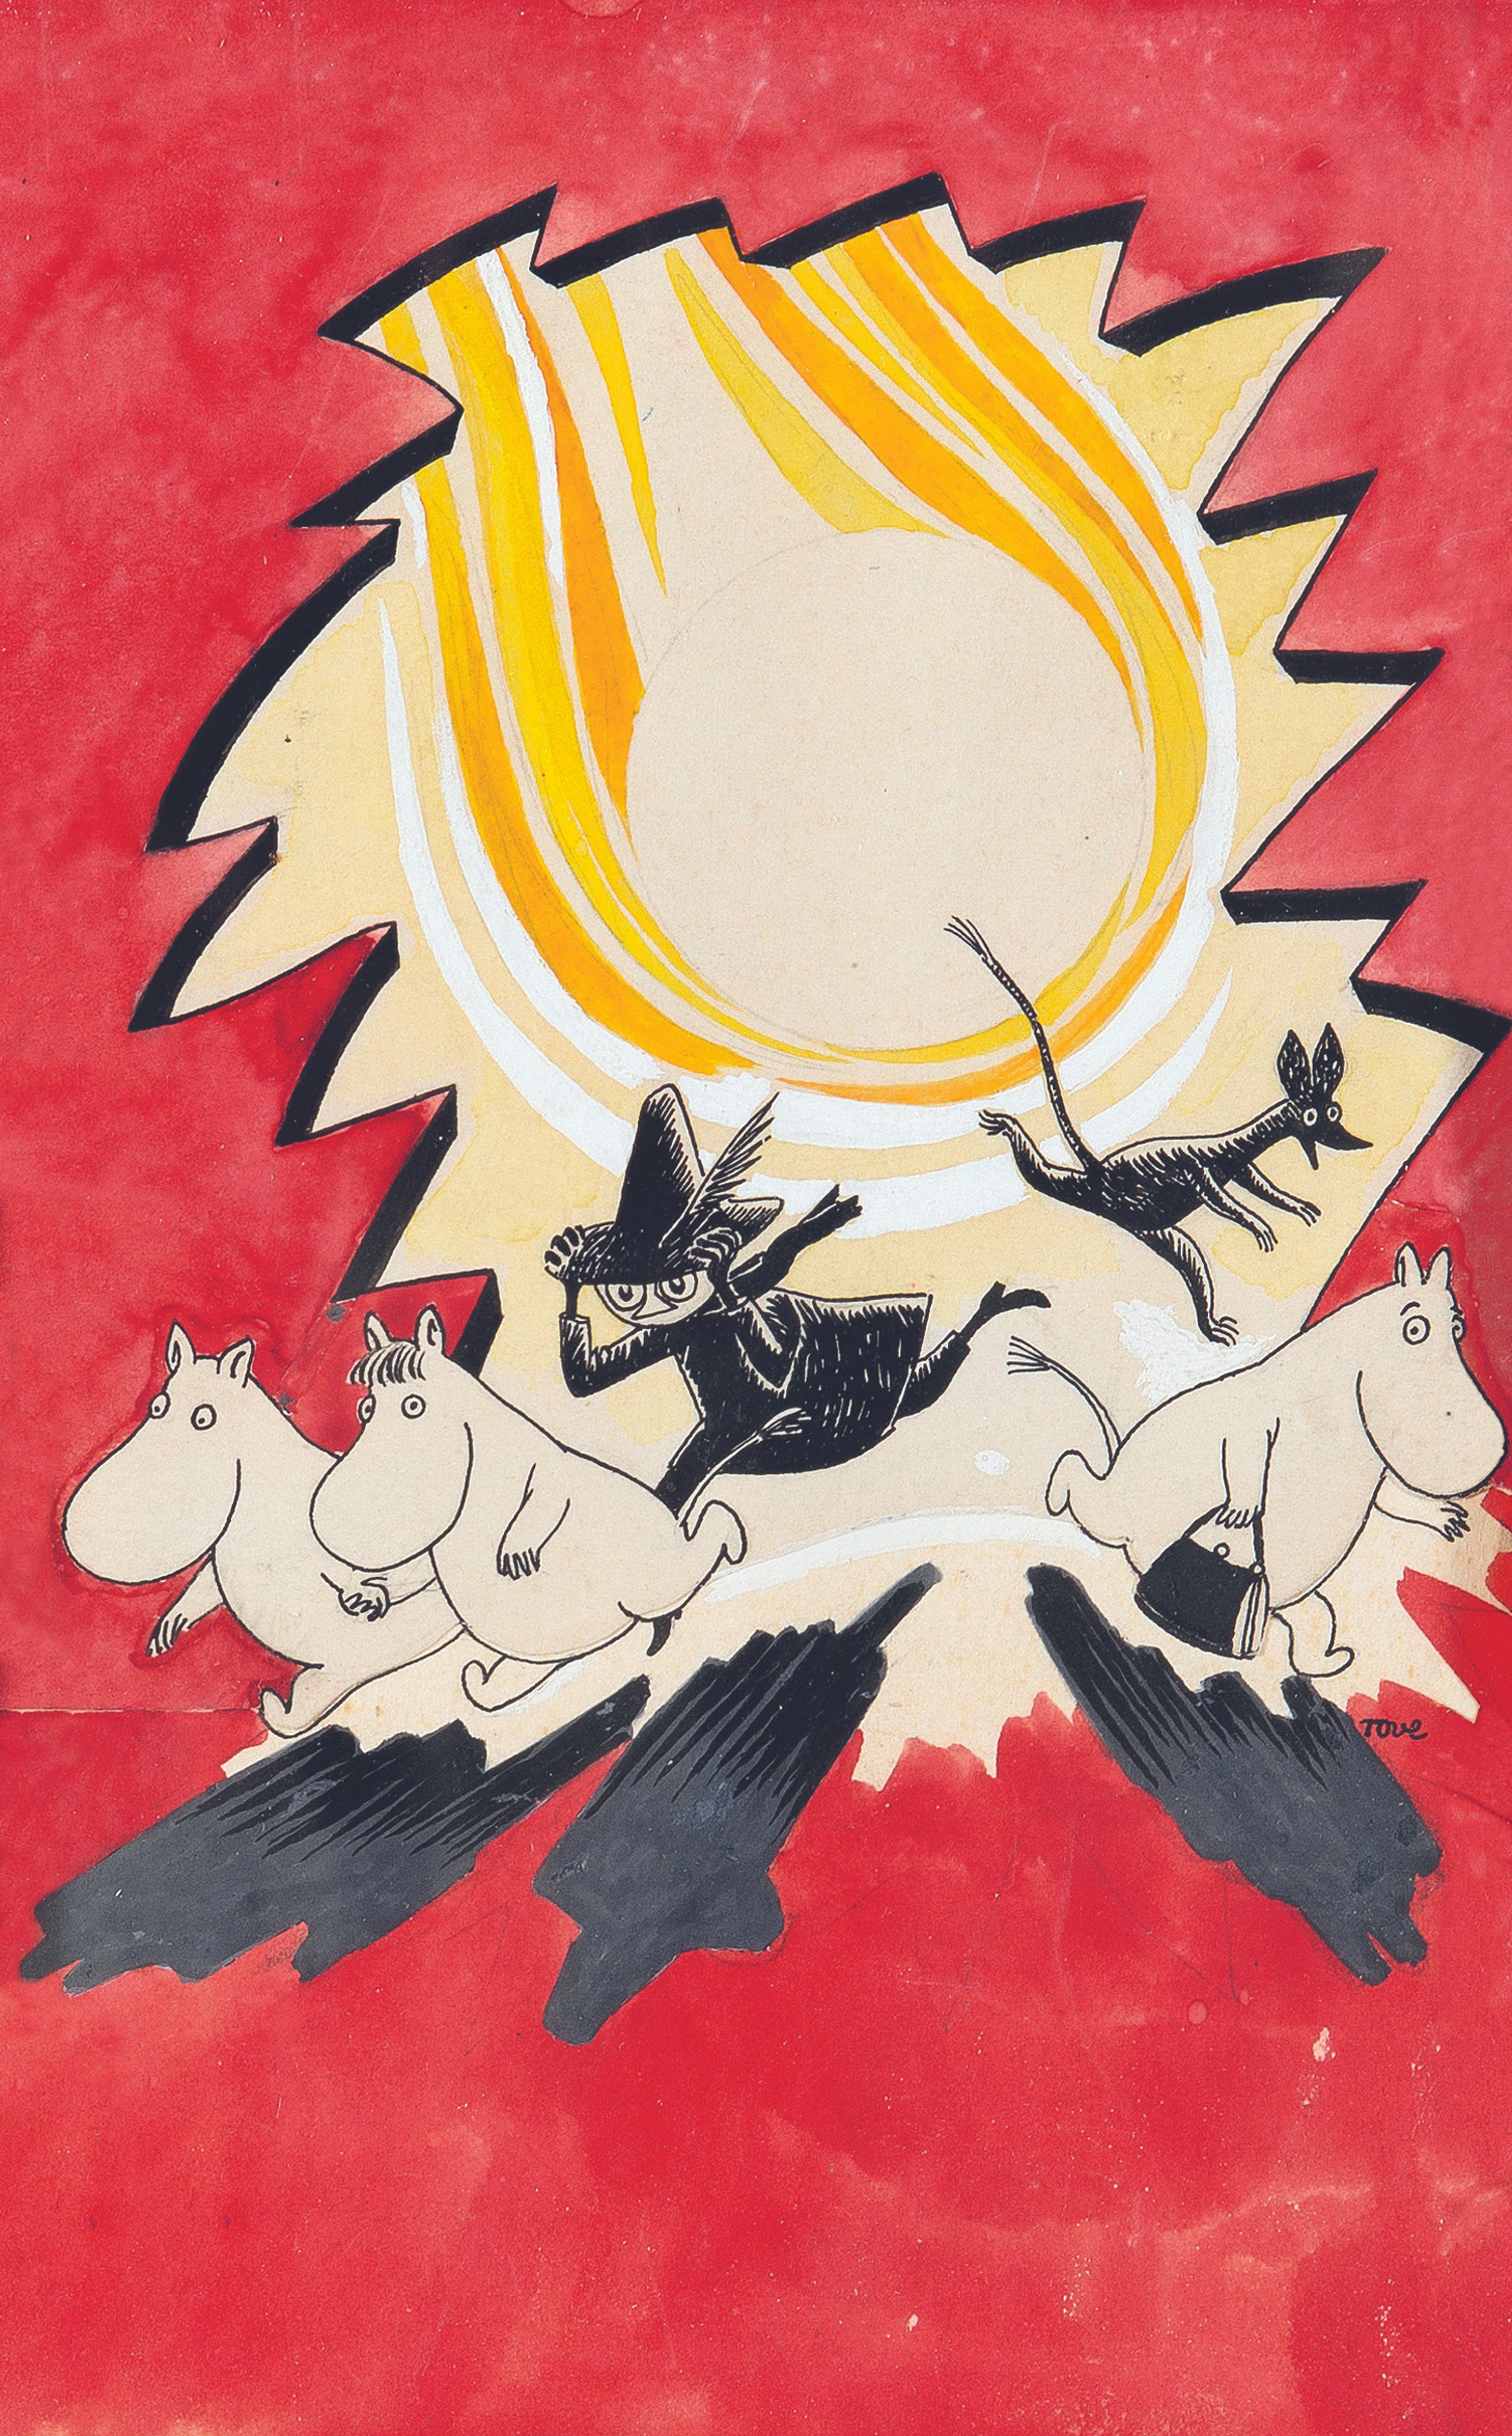 Illustration of three Moomin trolls a person and a mouse running away from a comet in the background